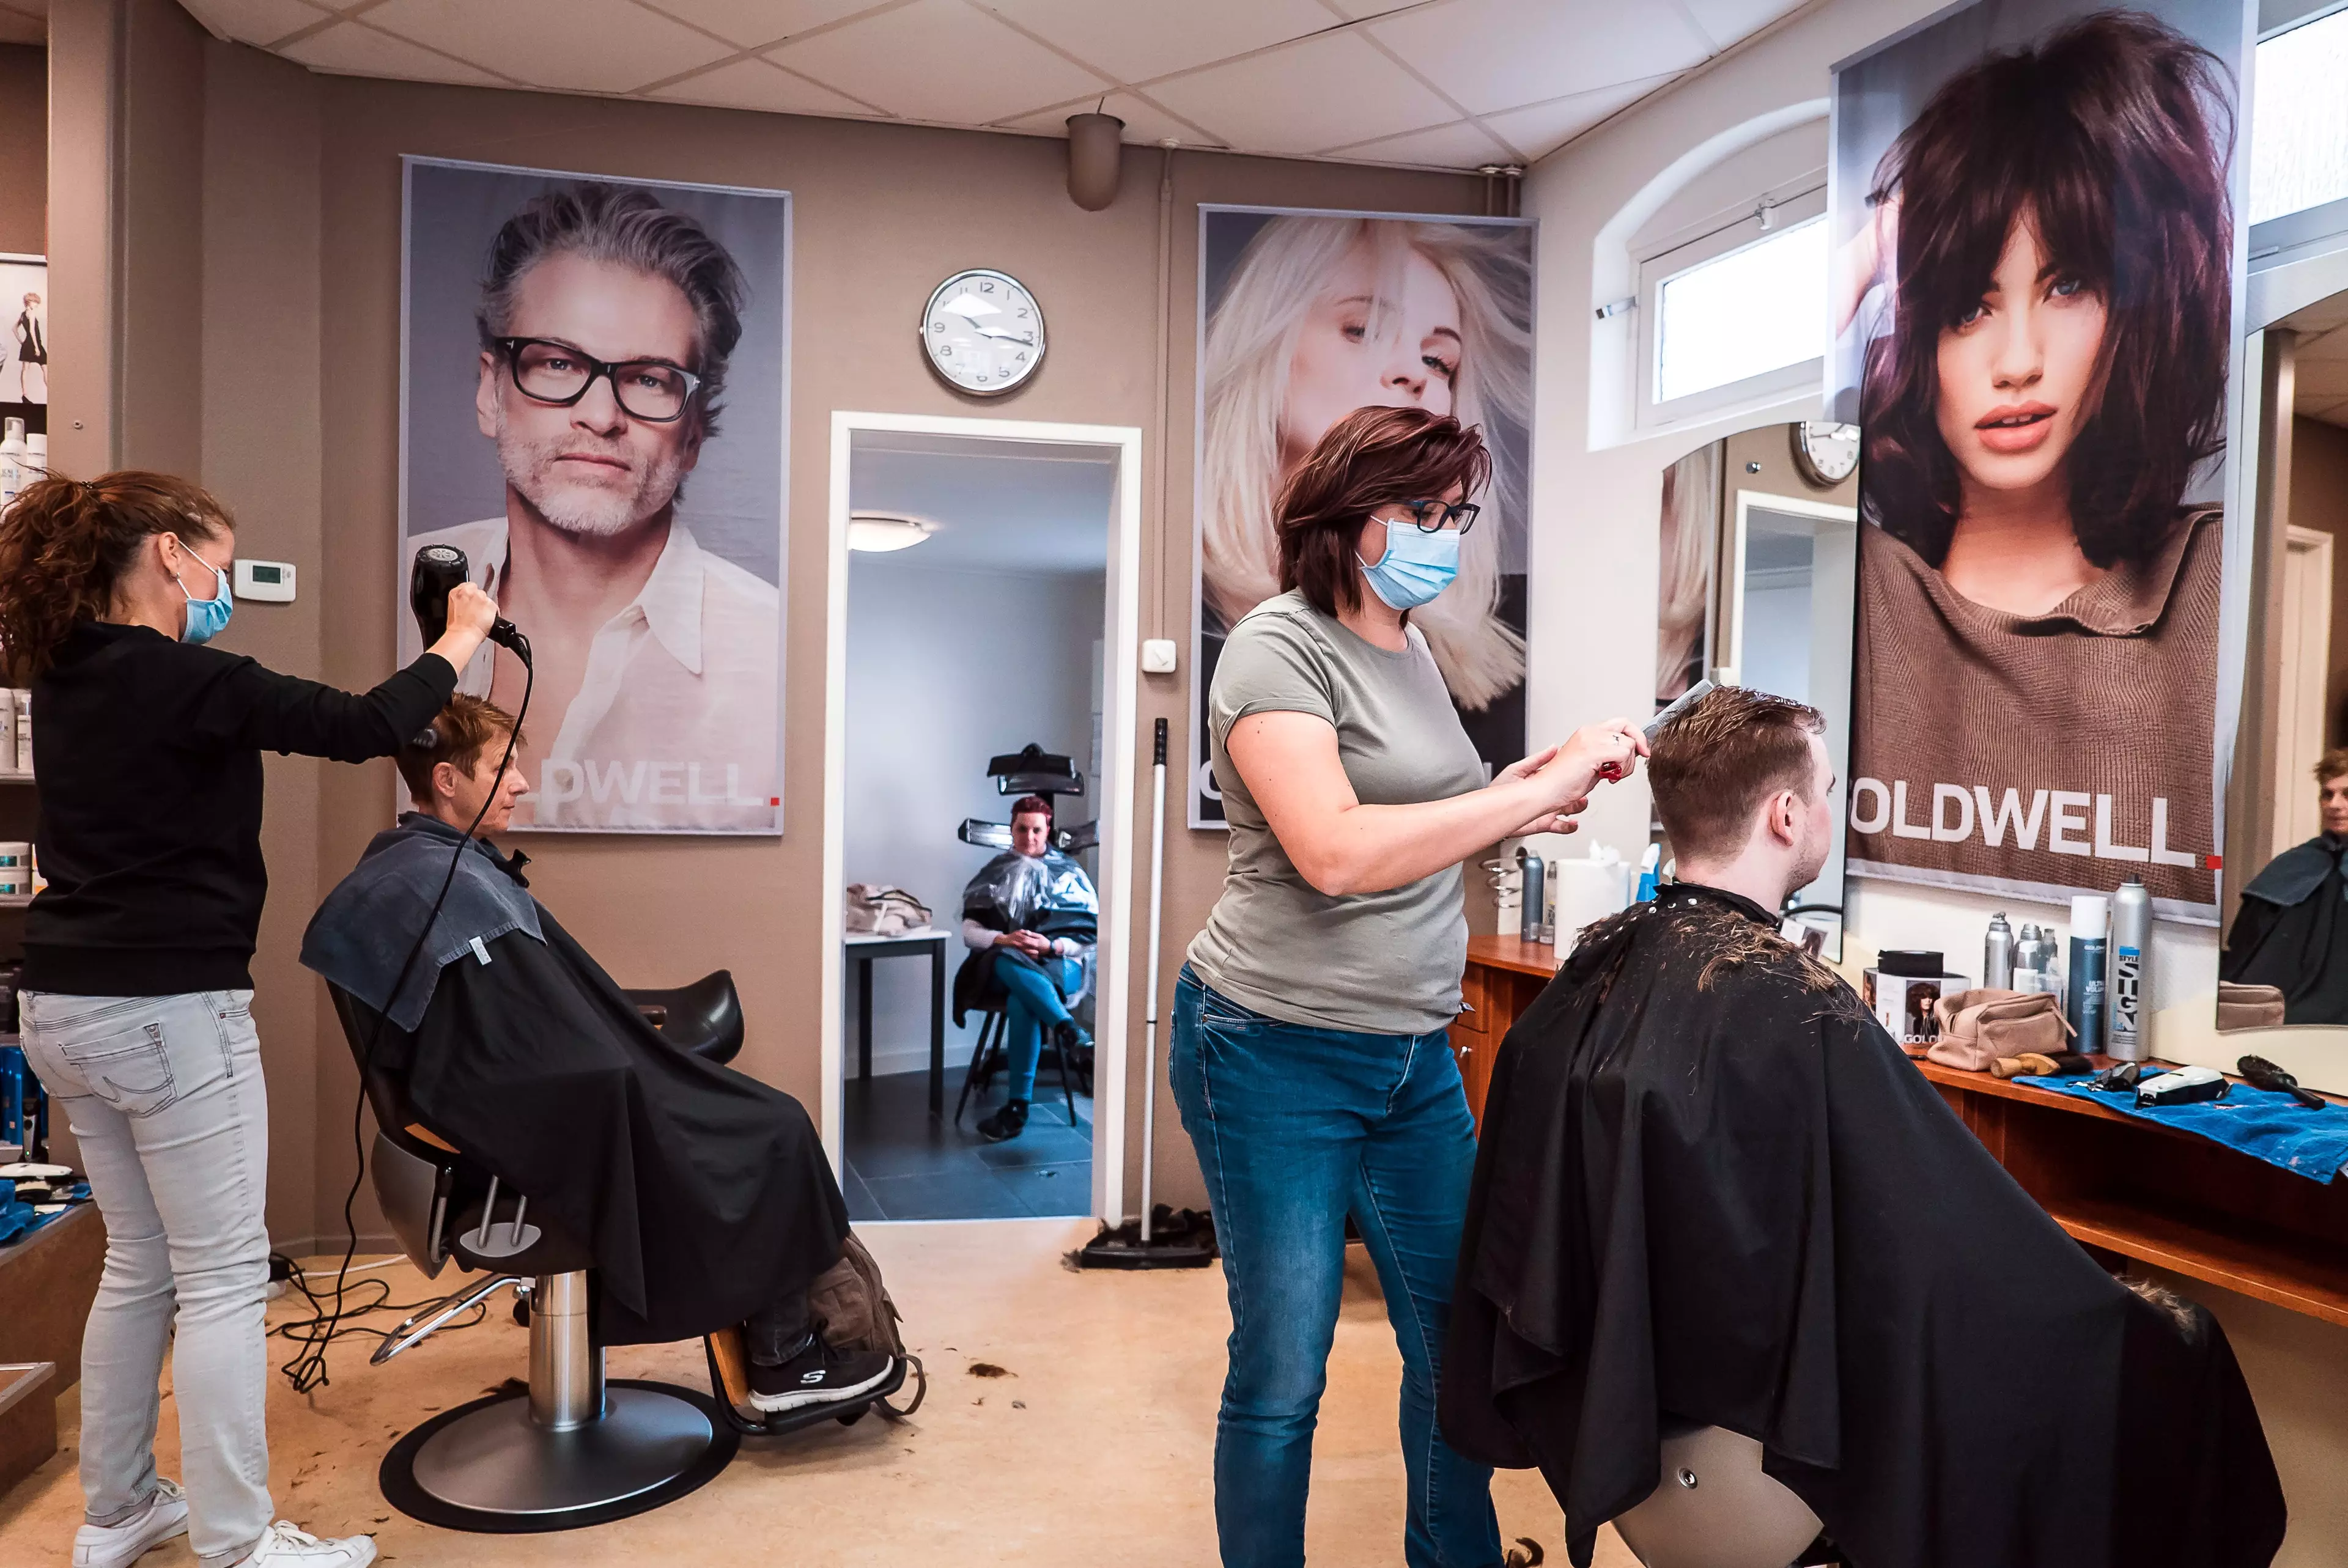 A salon in the Netherlands, where staff are required to wear face coverings but clients are mask-free (